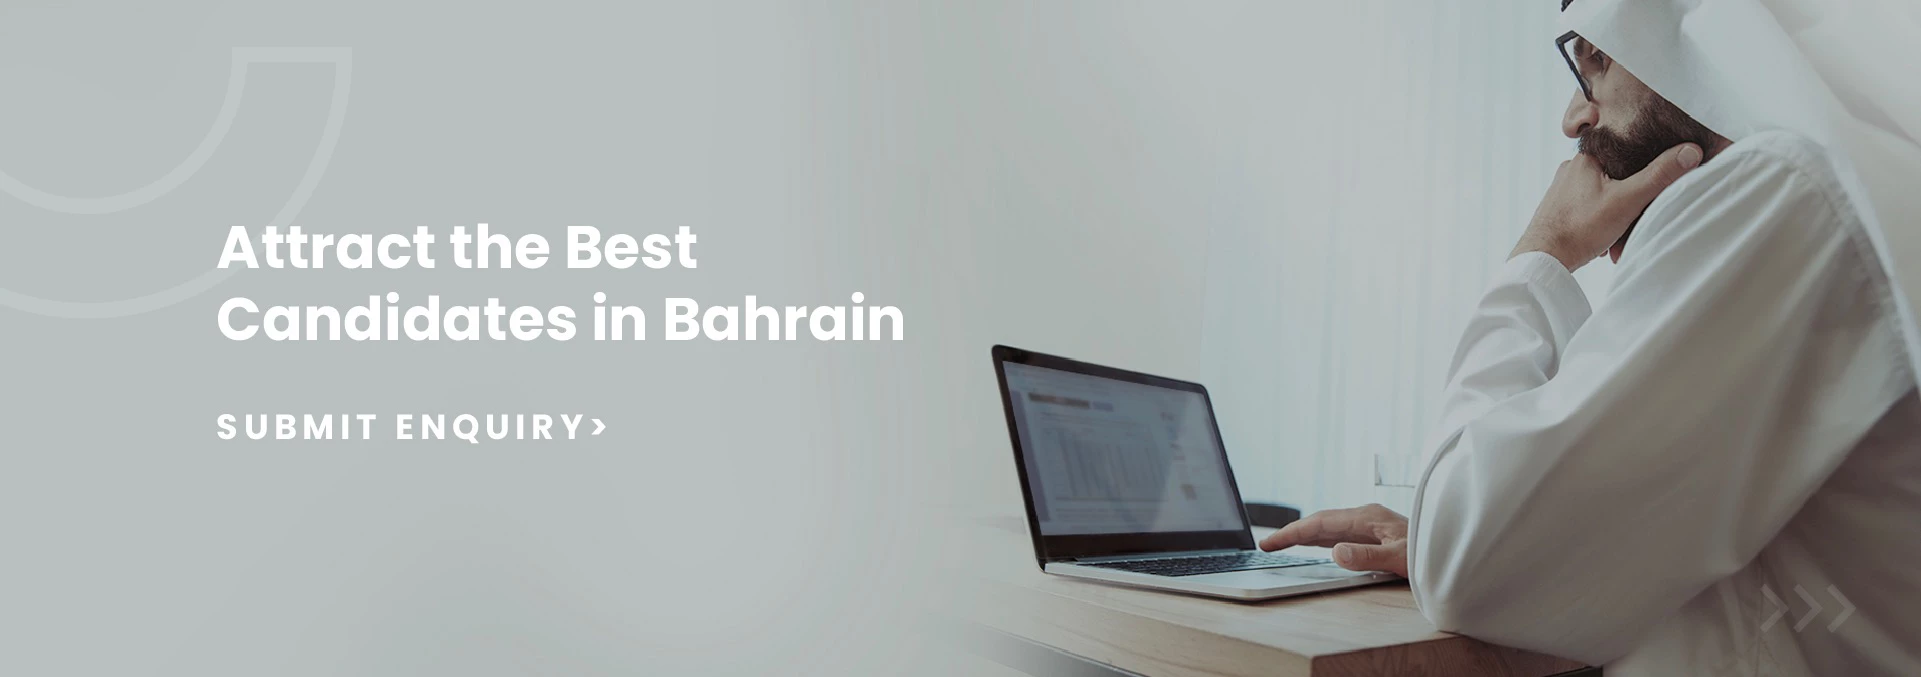 Attract the Best Candidates in Bahrain